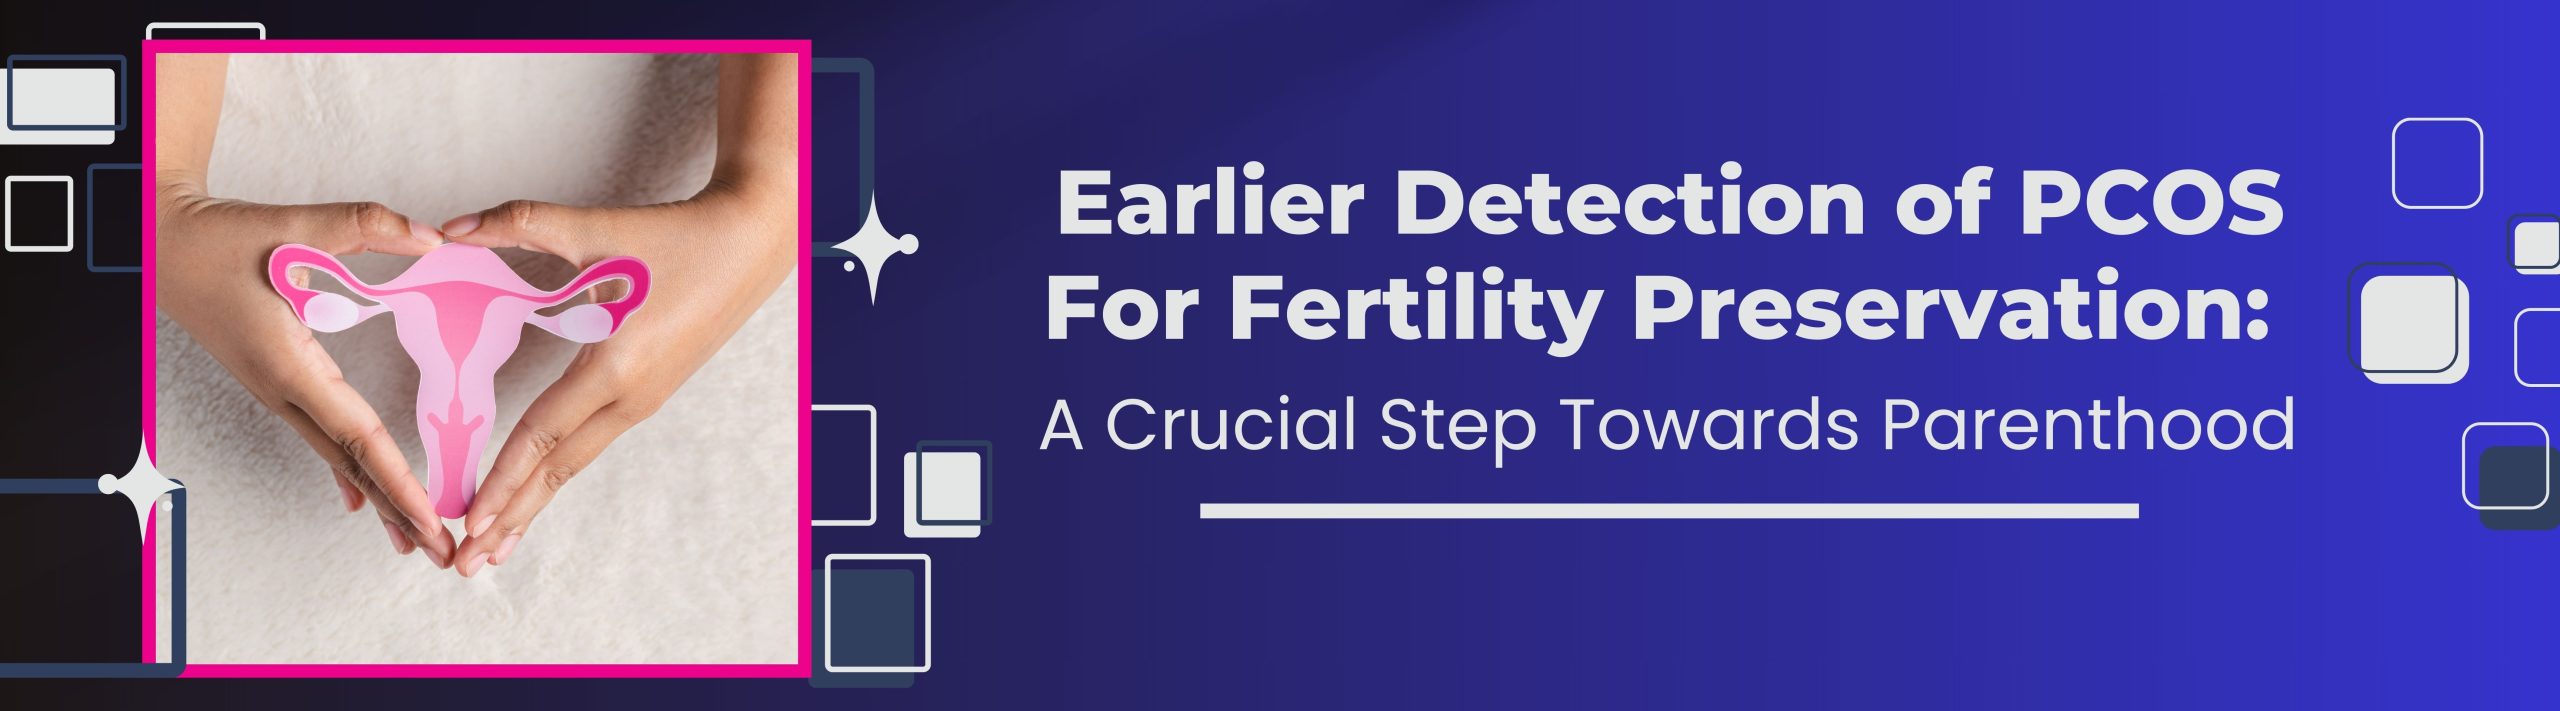 Earlier Detection of PCOS For Fertility Preservation: A Crucial Step Towards Parenthood